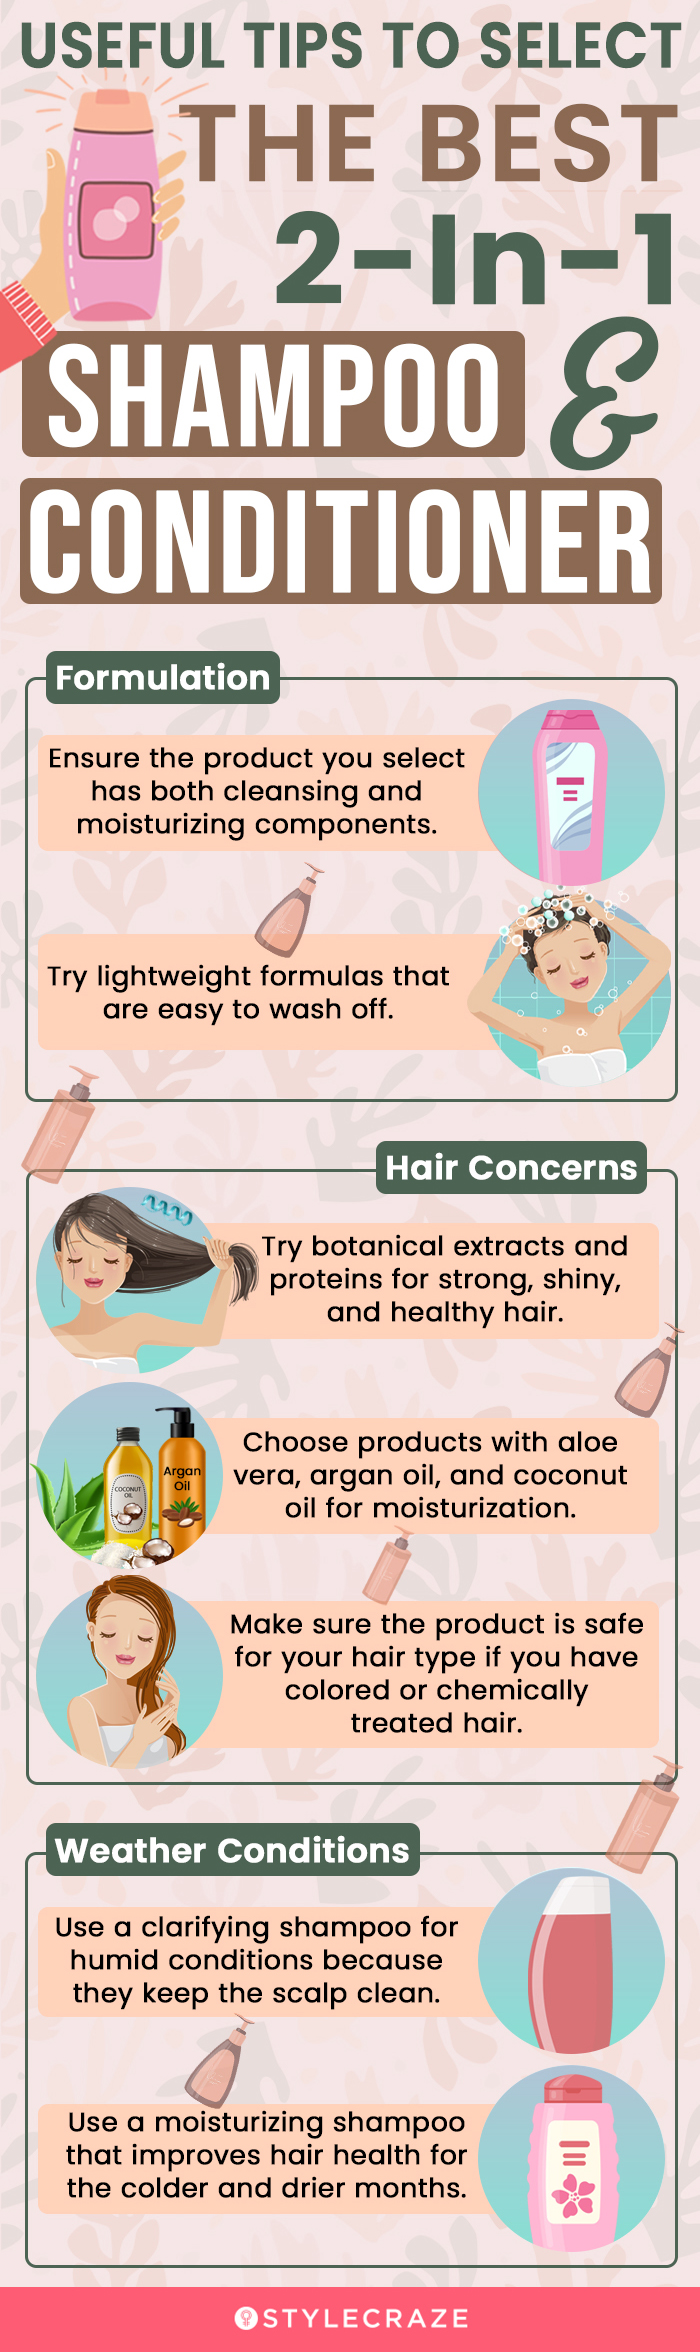 Useful Tips To Buy The Best 2-In-1 Shampoo and Conditioner